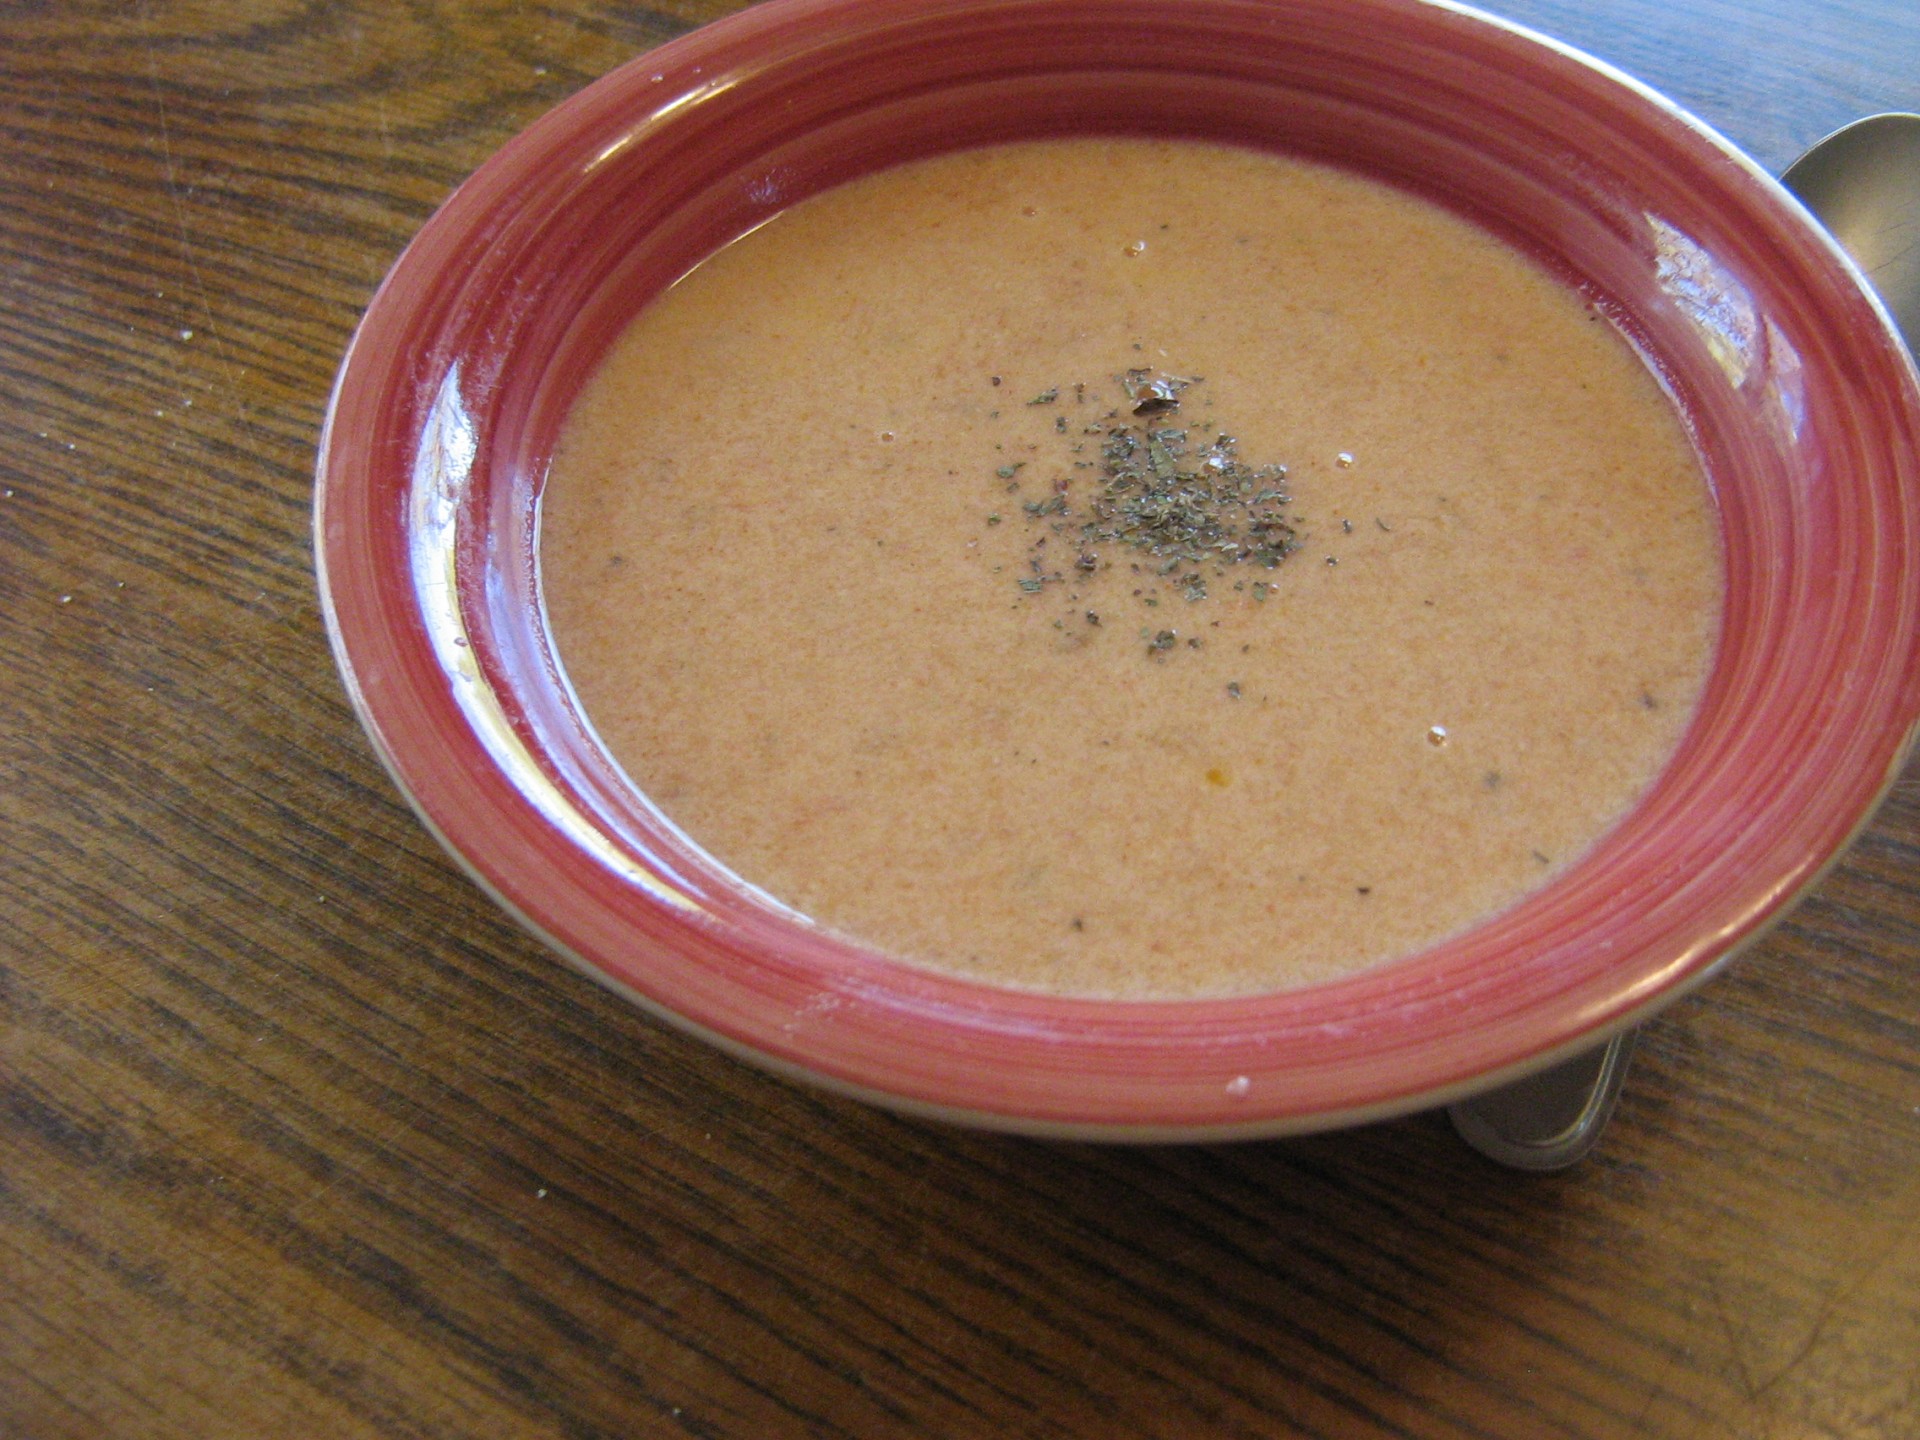 Zesty Mexican Tomato Soup